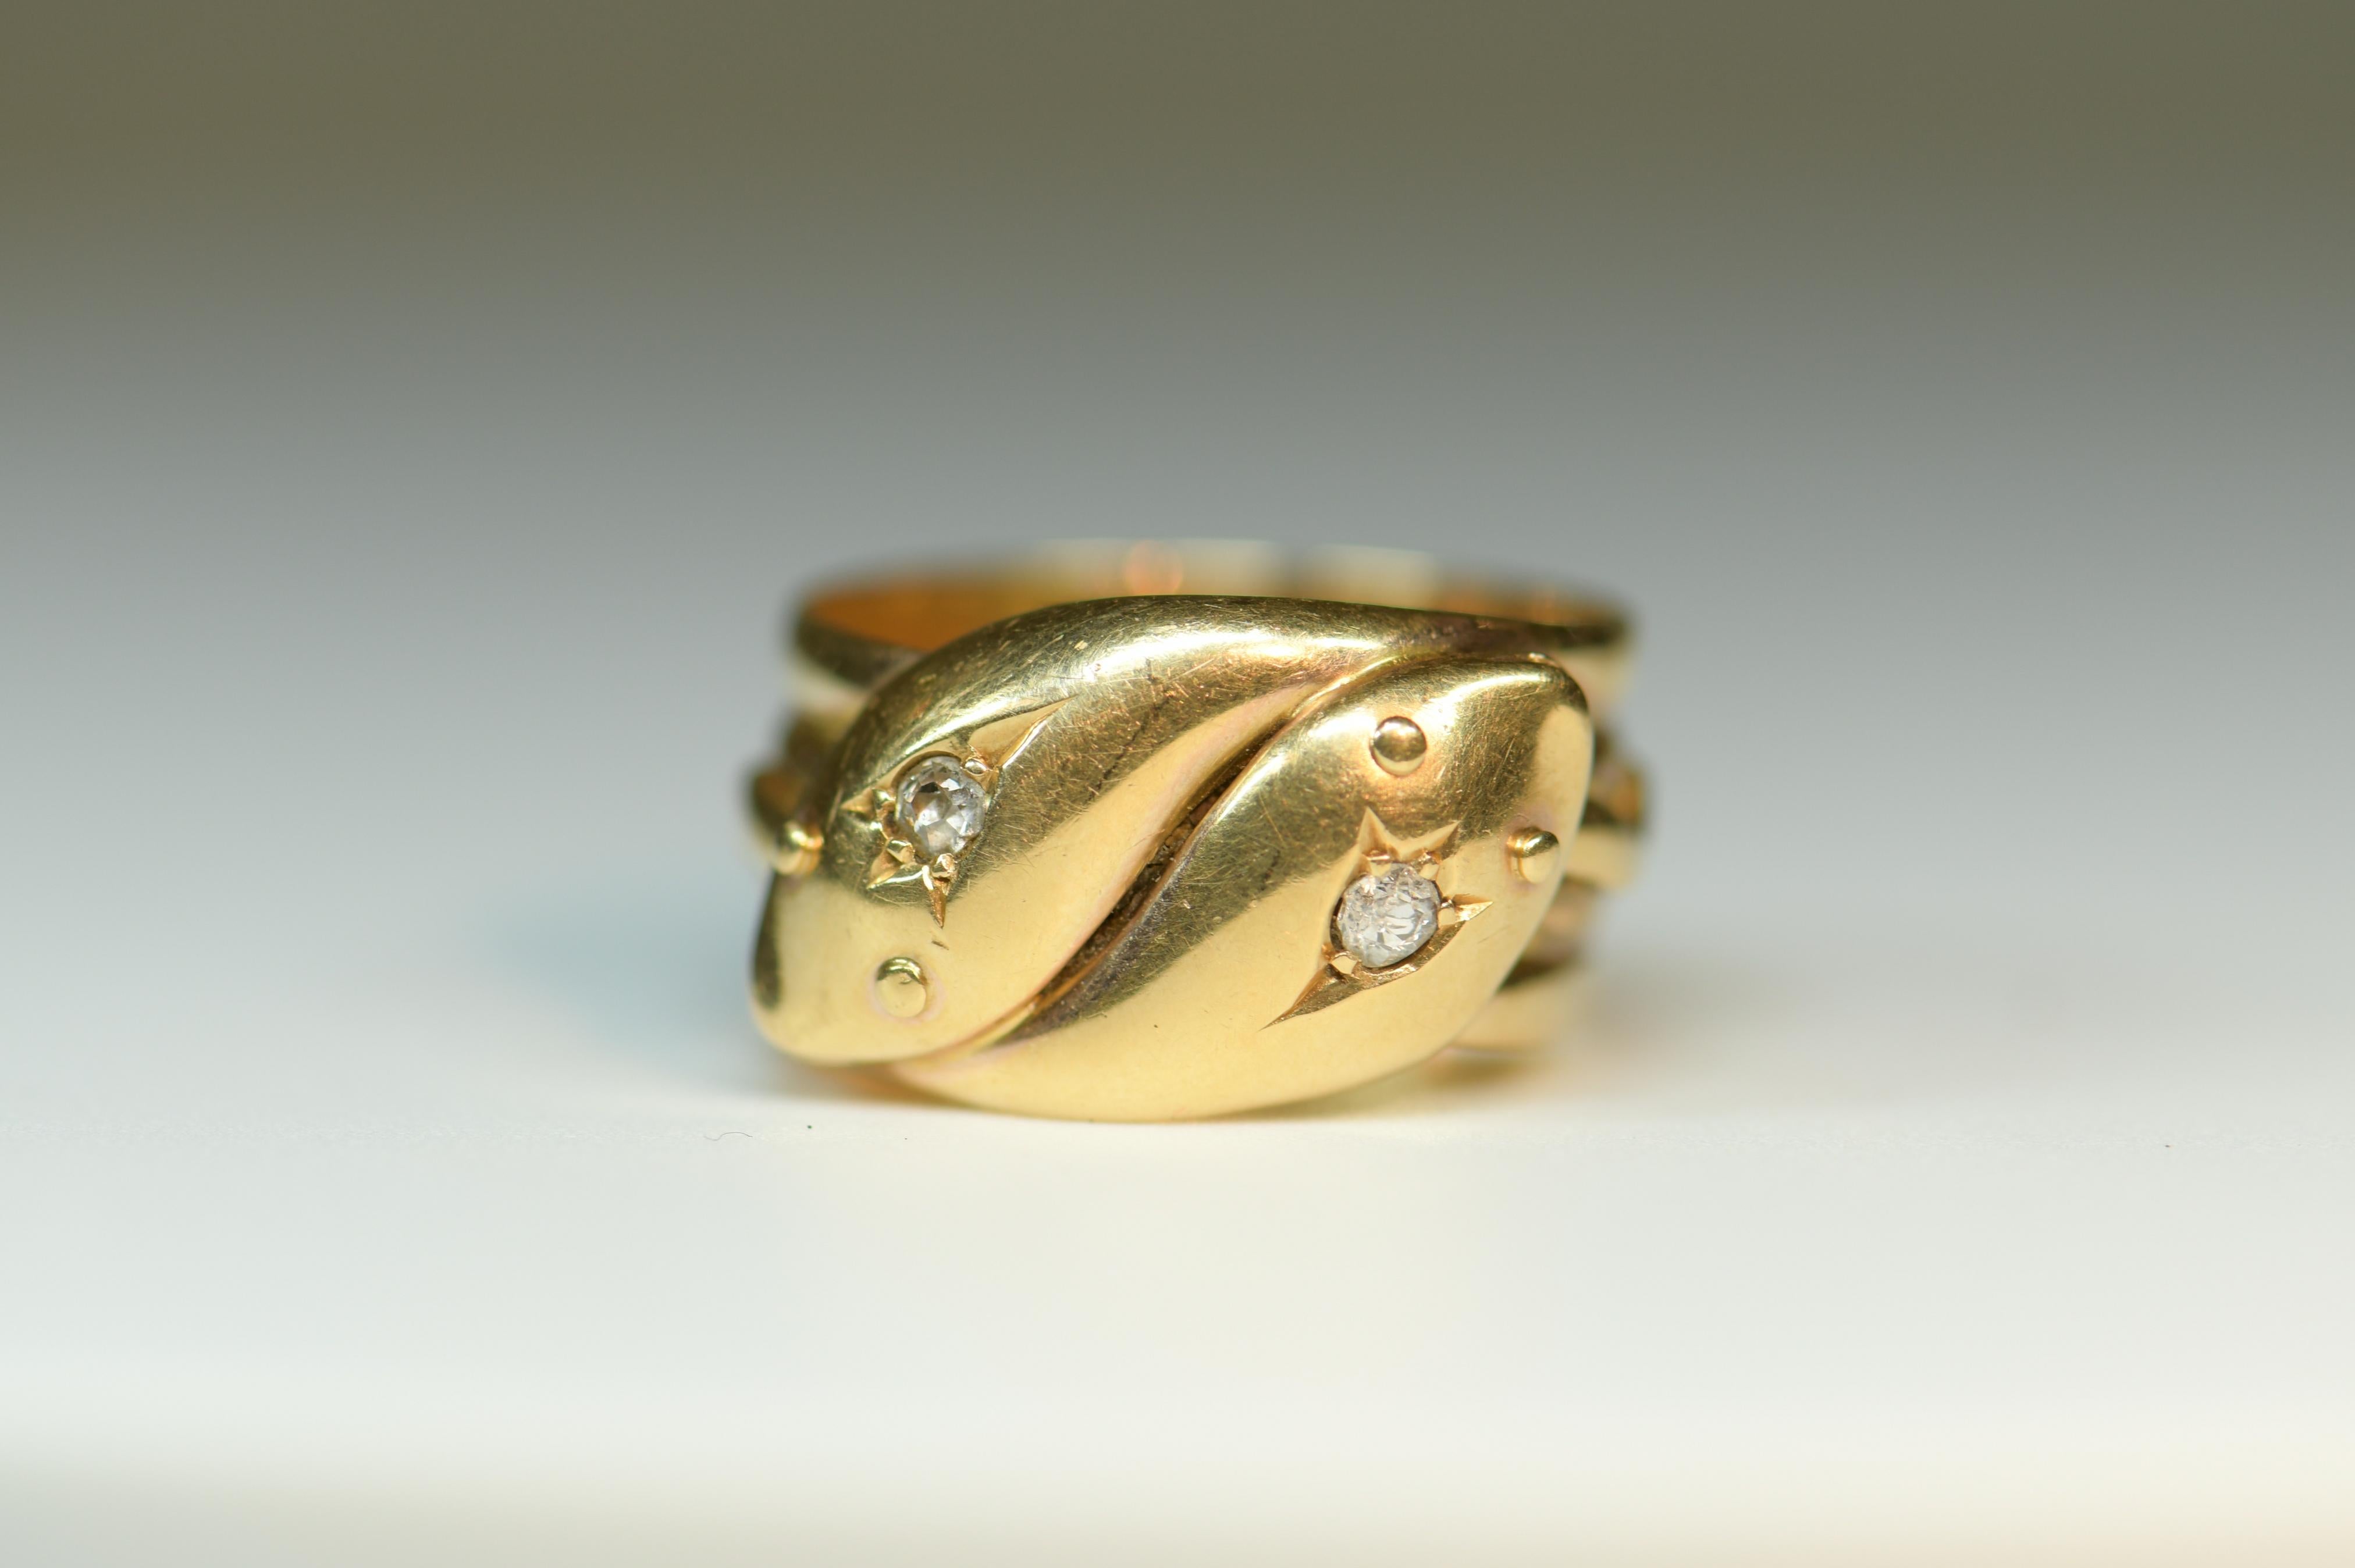 Round Cut Victorian 18 Karat Gold Entwined Double Snake Ring with Diamond Set Eyes